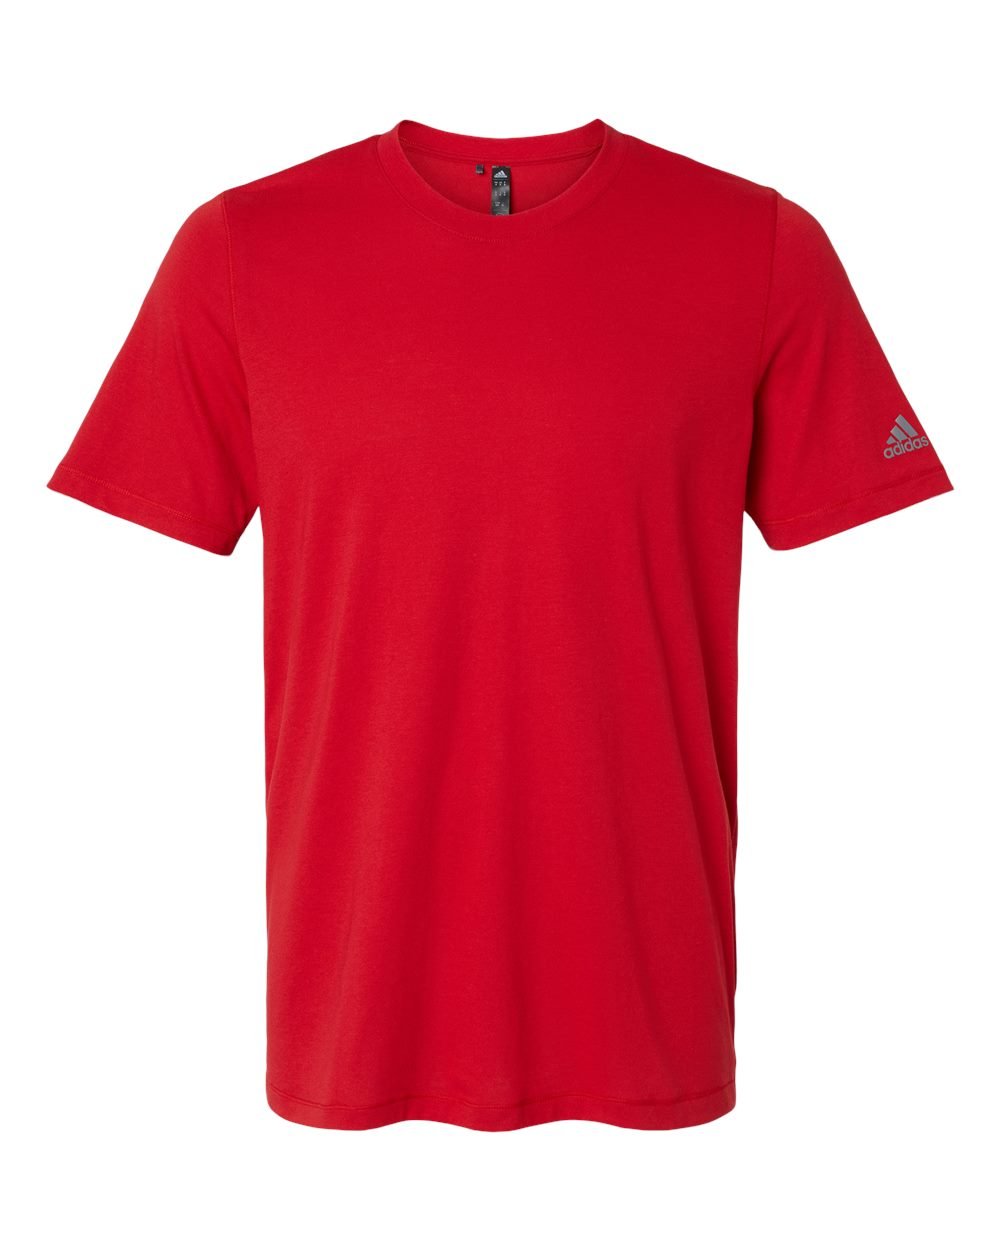 Adidas A556 Blended T-Shirt #color_Power Red